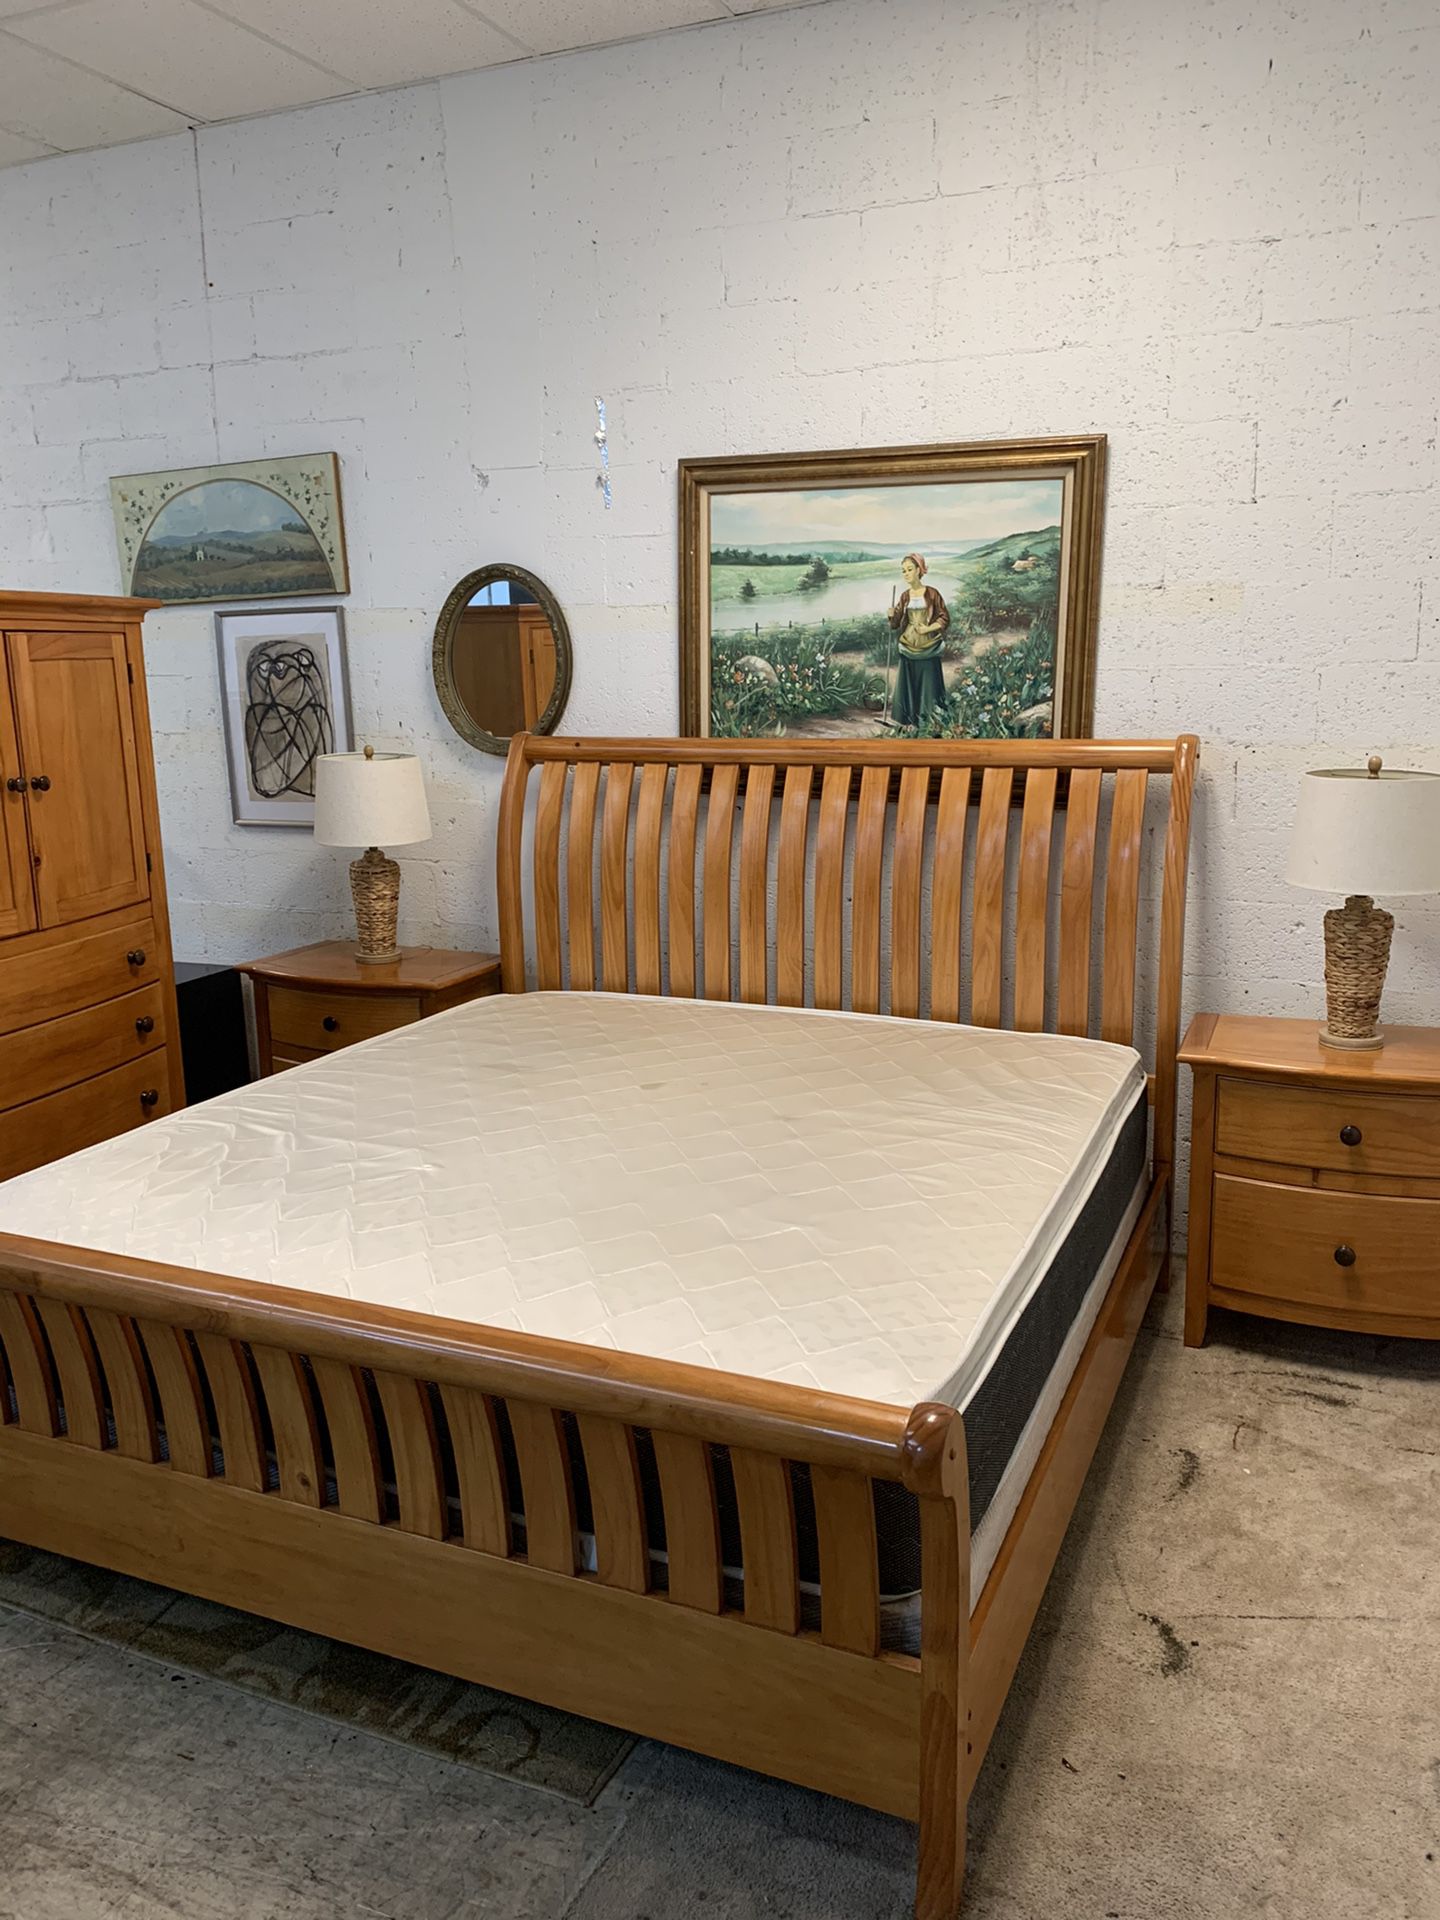 Beautiful solid wood king size bedroom set with mattress all in excellent condition like new !